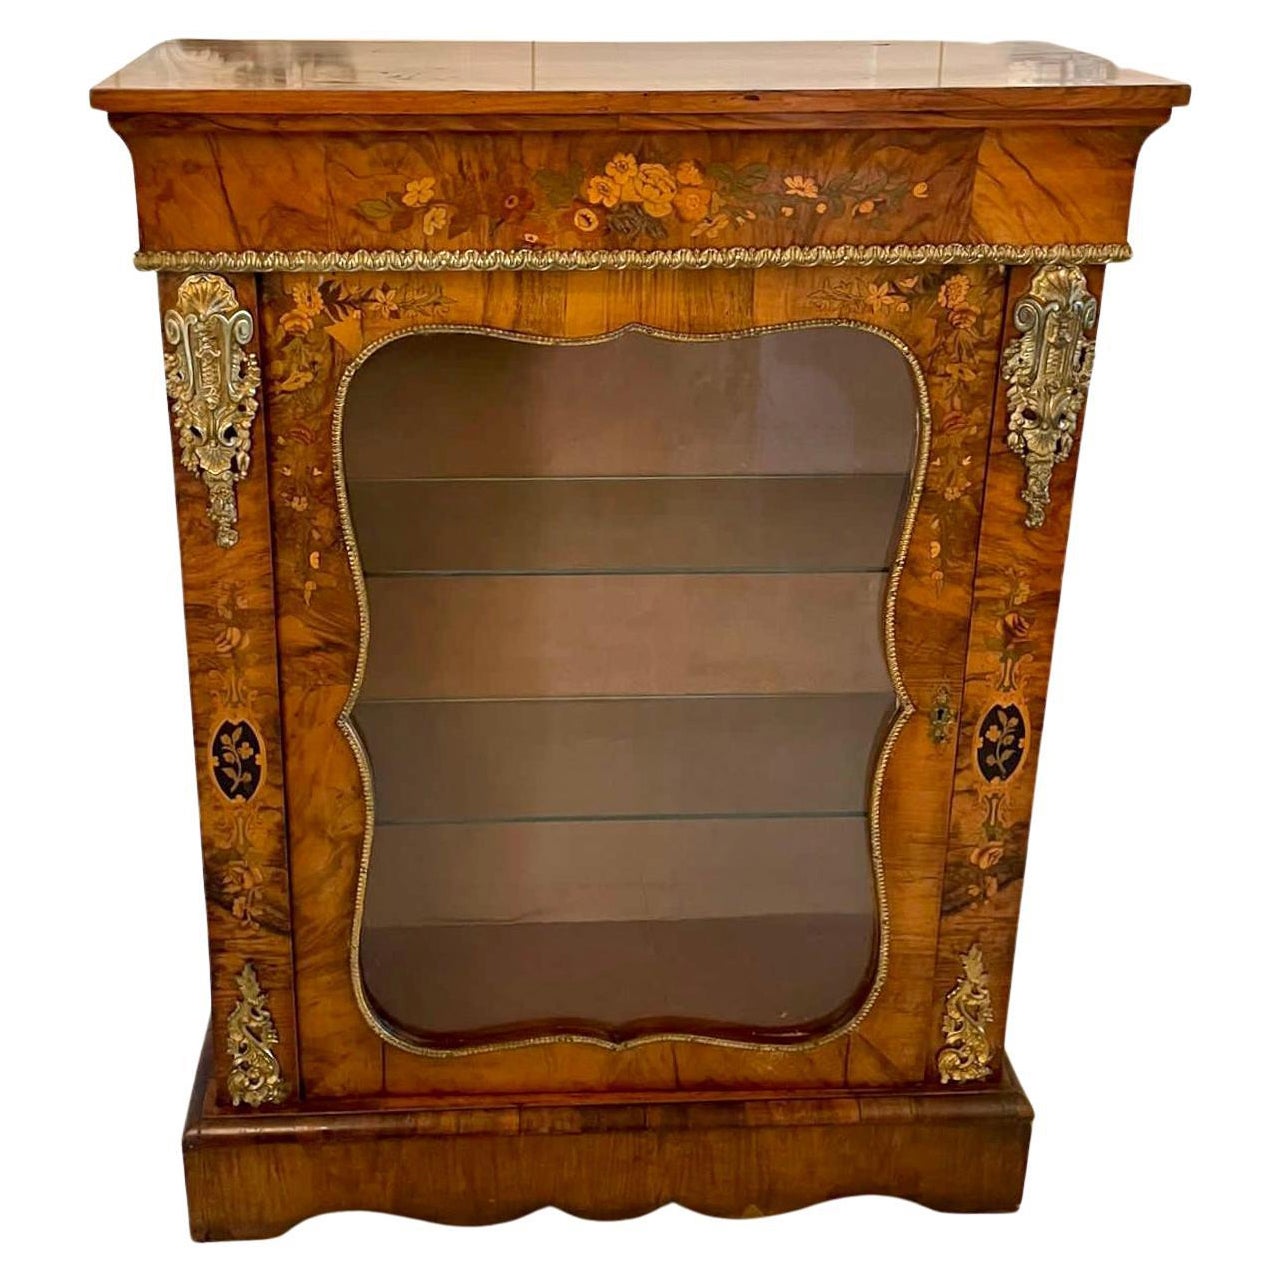 Fine Quality Antique Victorian Burr Walnut Floral Marquetry Inlaid Display Cabin For Sale